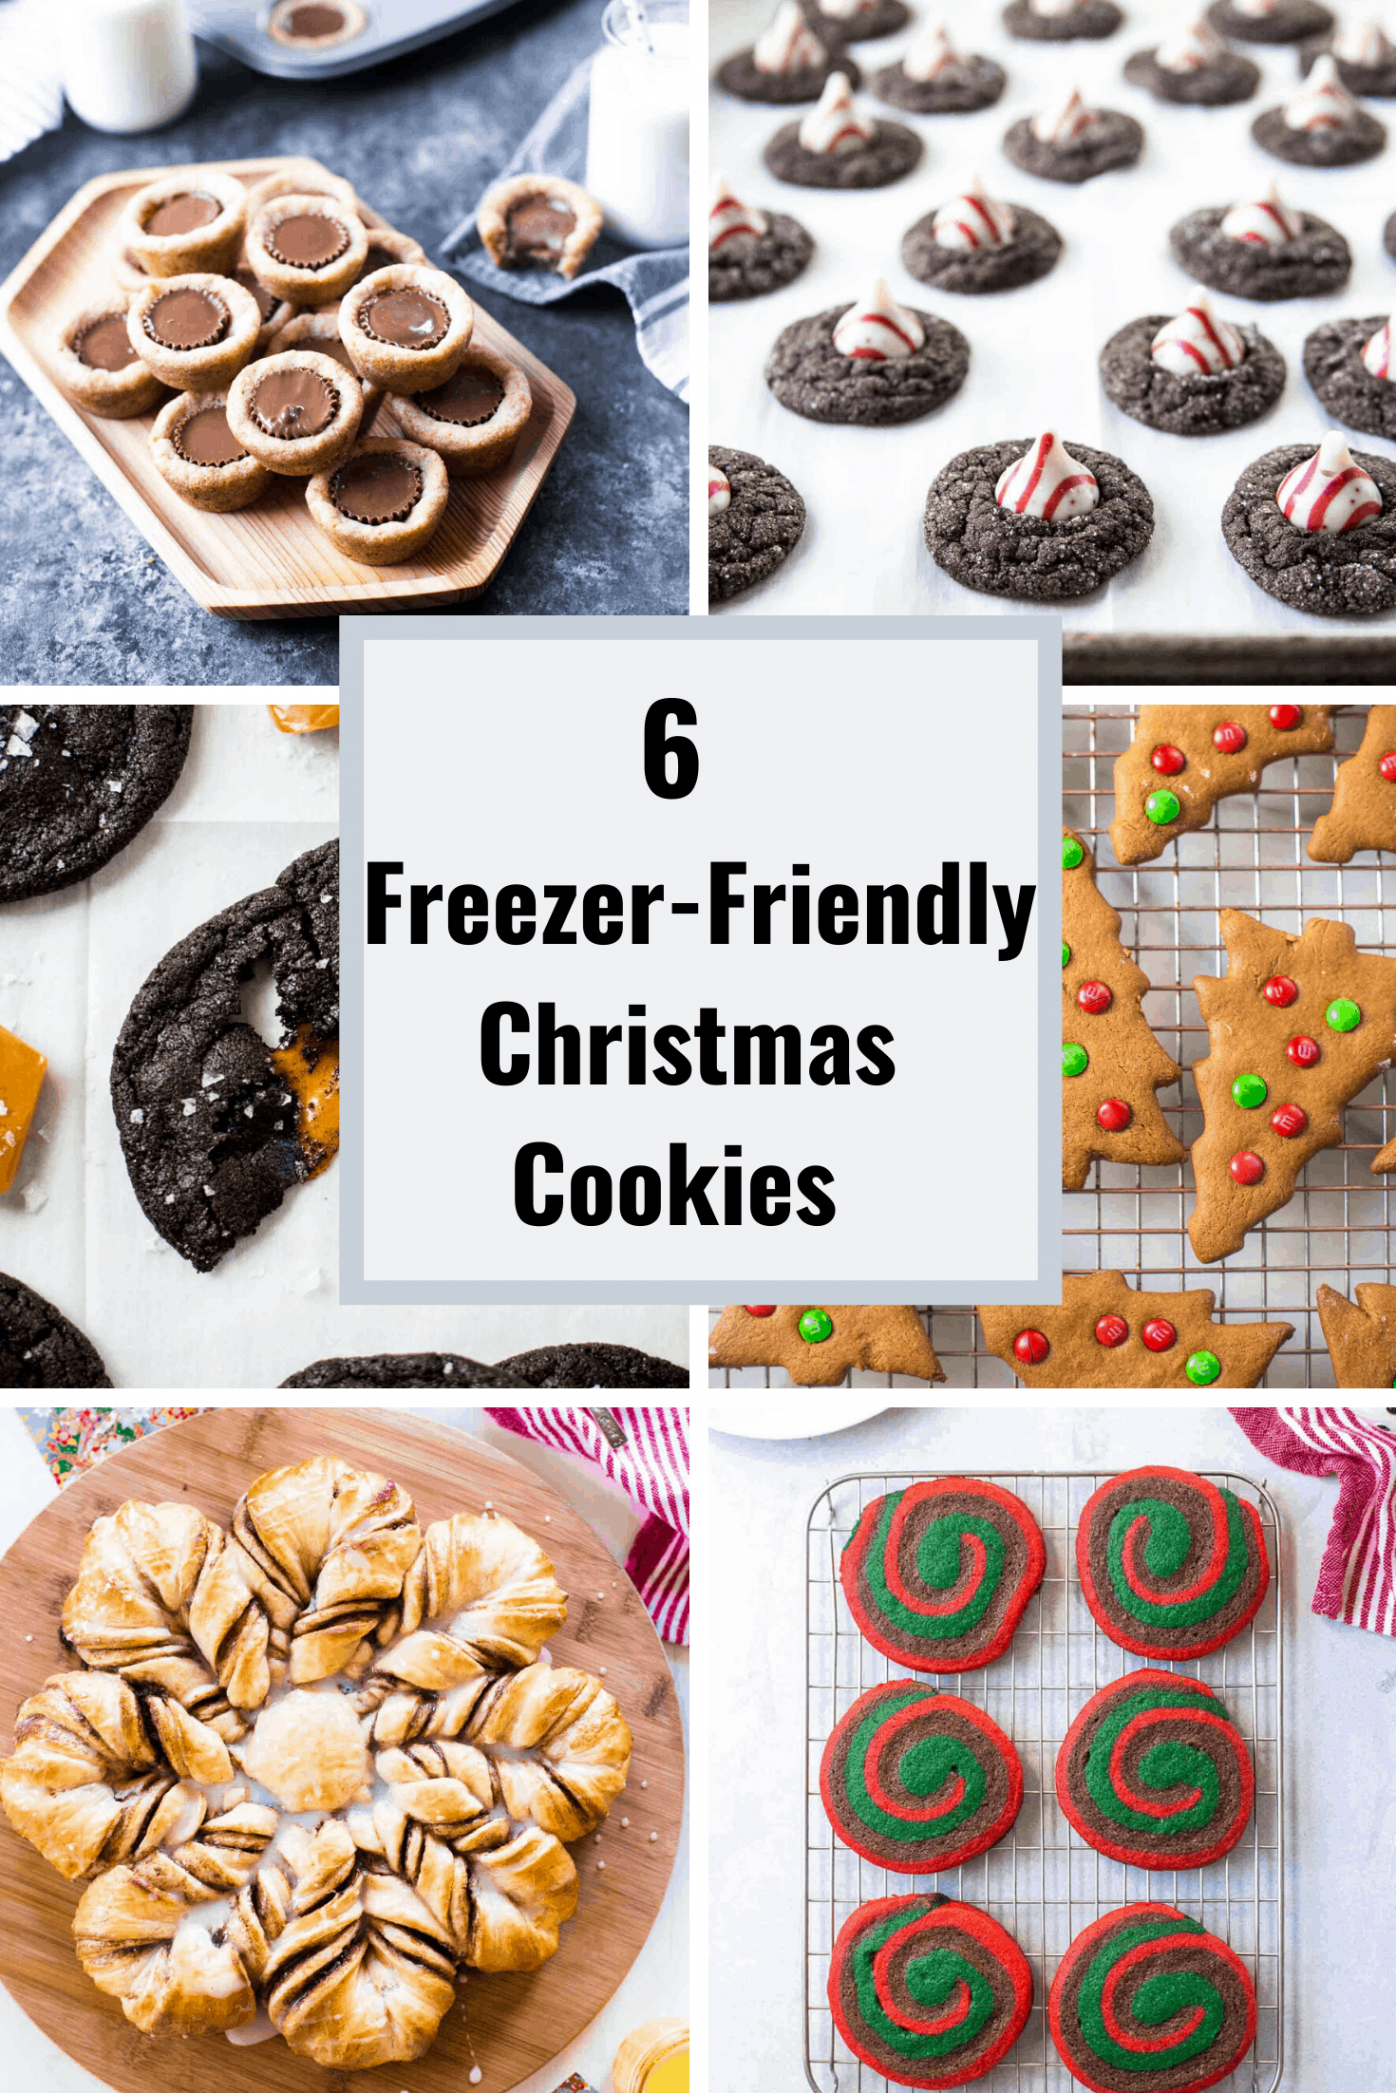 Freezer-Friendly Christmas Cookies To Make Now and Bake Through